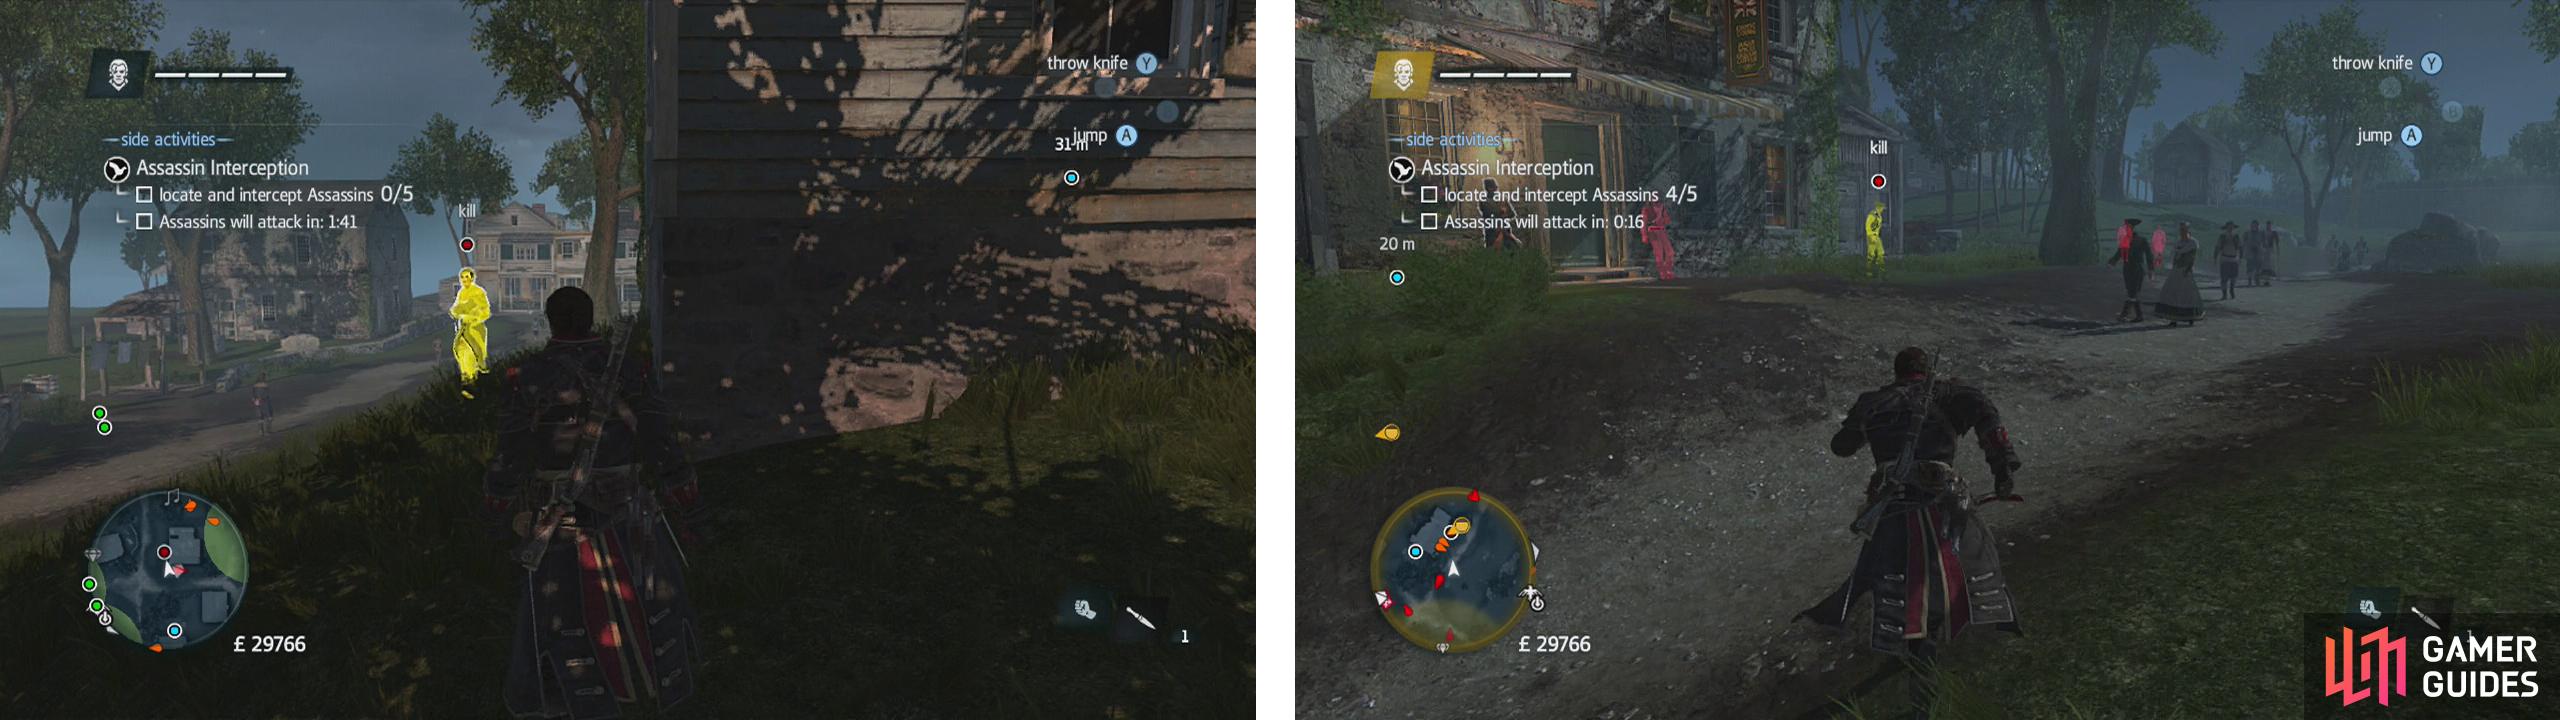 The first assassin is close to the start (left) and the last is around the corner from the target (right).